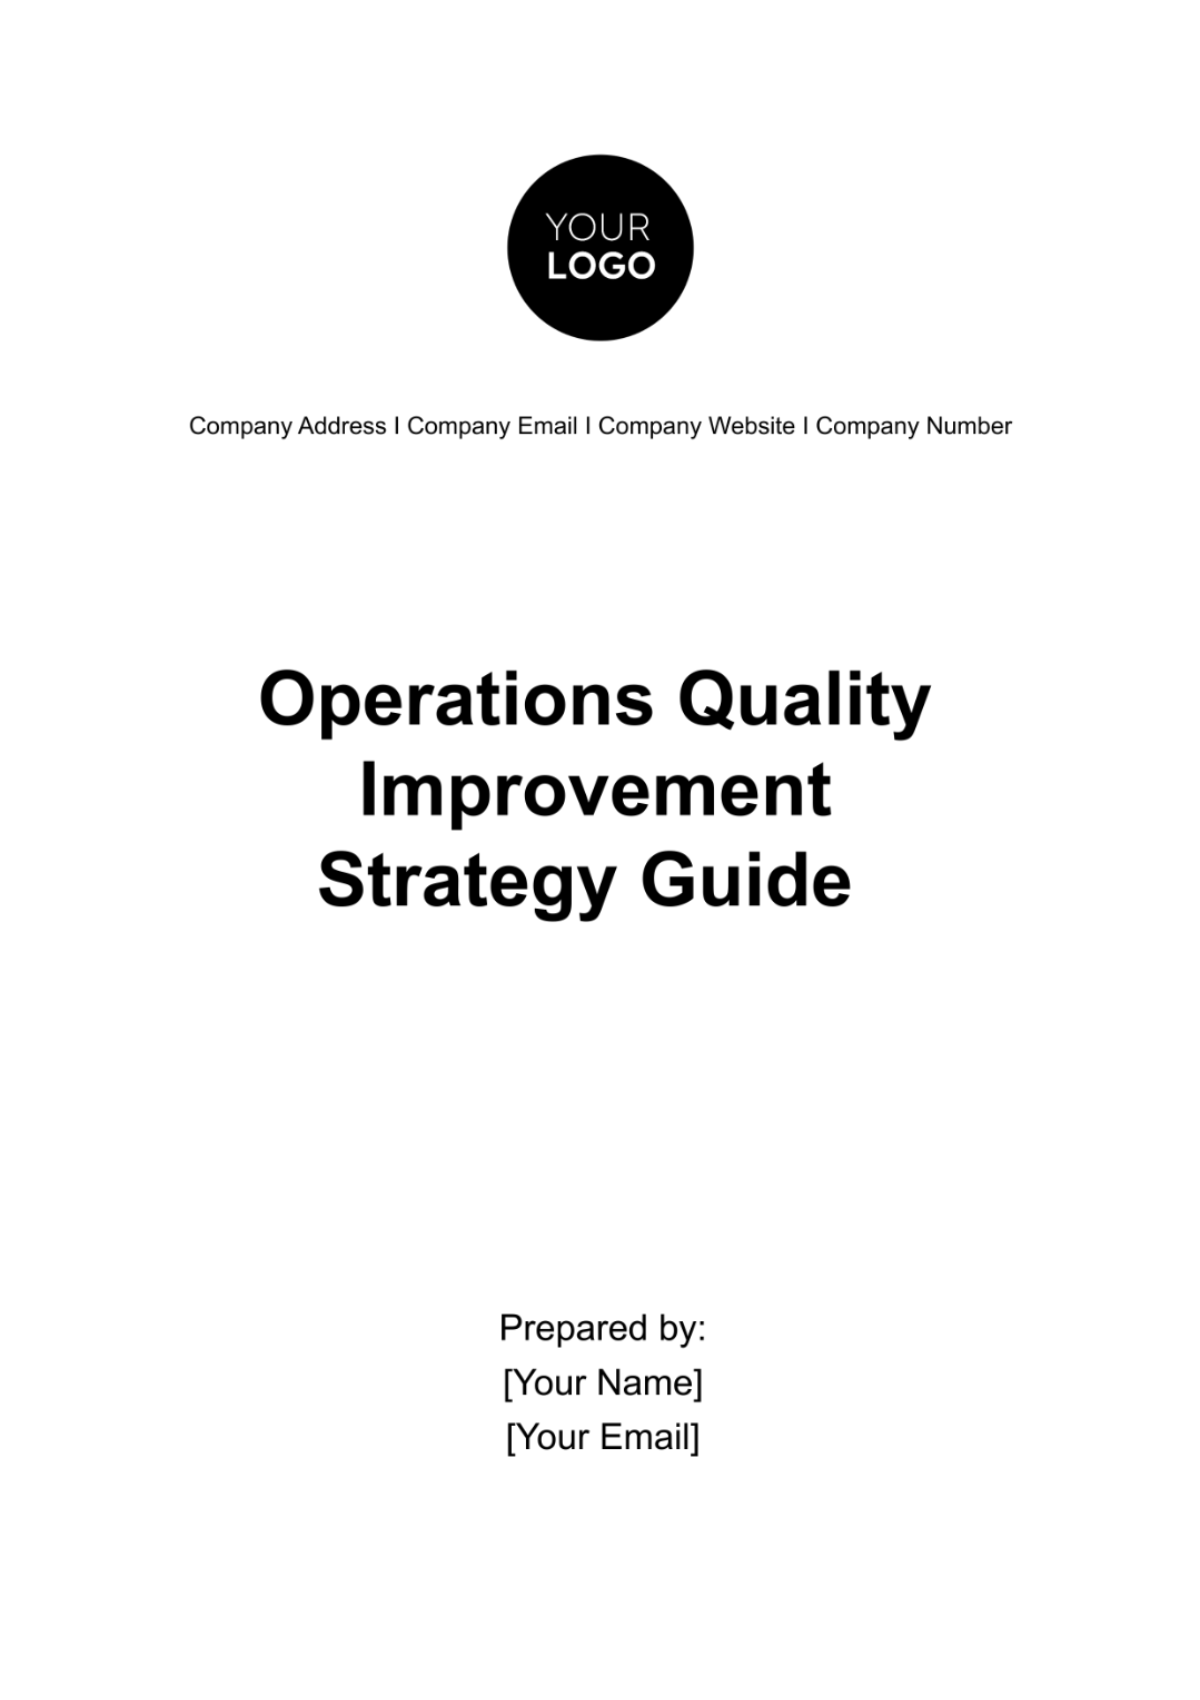 Operations Quality Improvement Strategy Guide Template